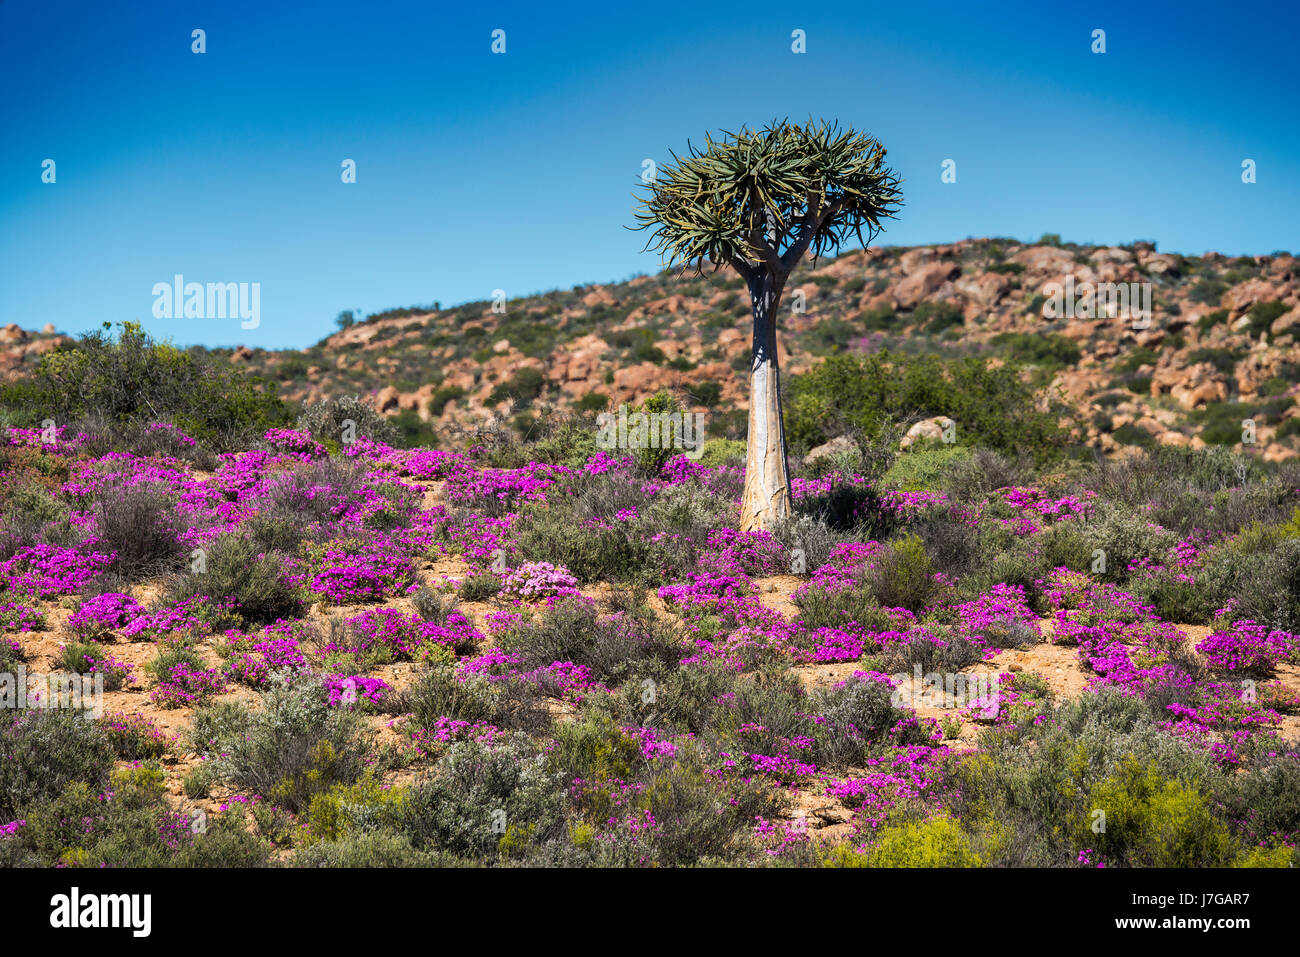 Quiver tree (Aloe dichotoma) with purple and pink flowers, midday flower (Drosanthemum hispidum), Namaqualand, Northern Cape Stock Photo